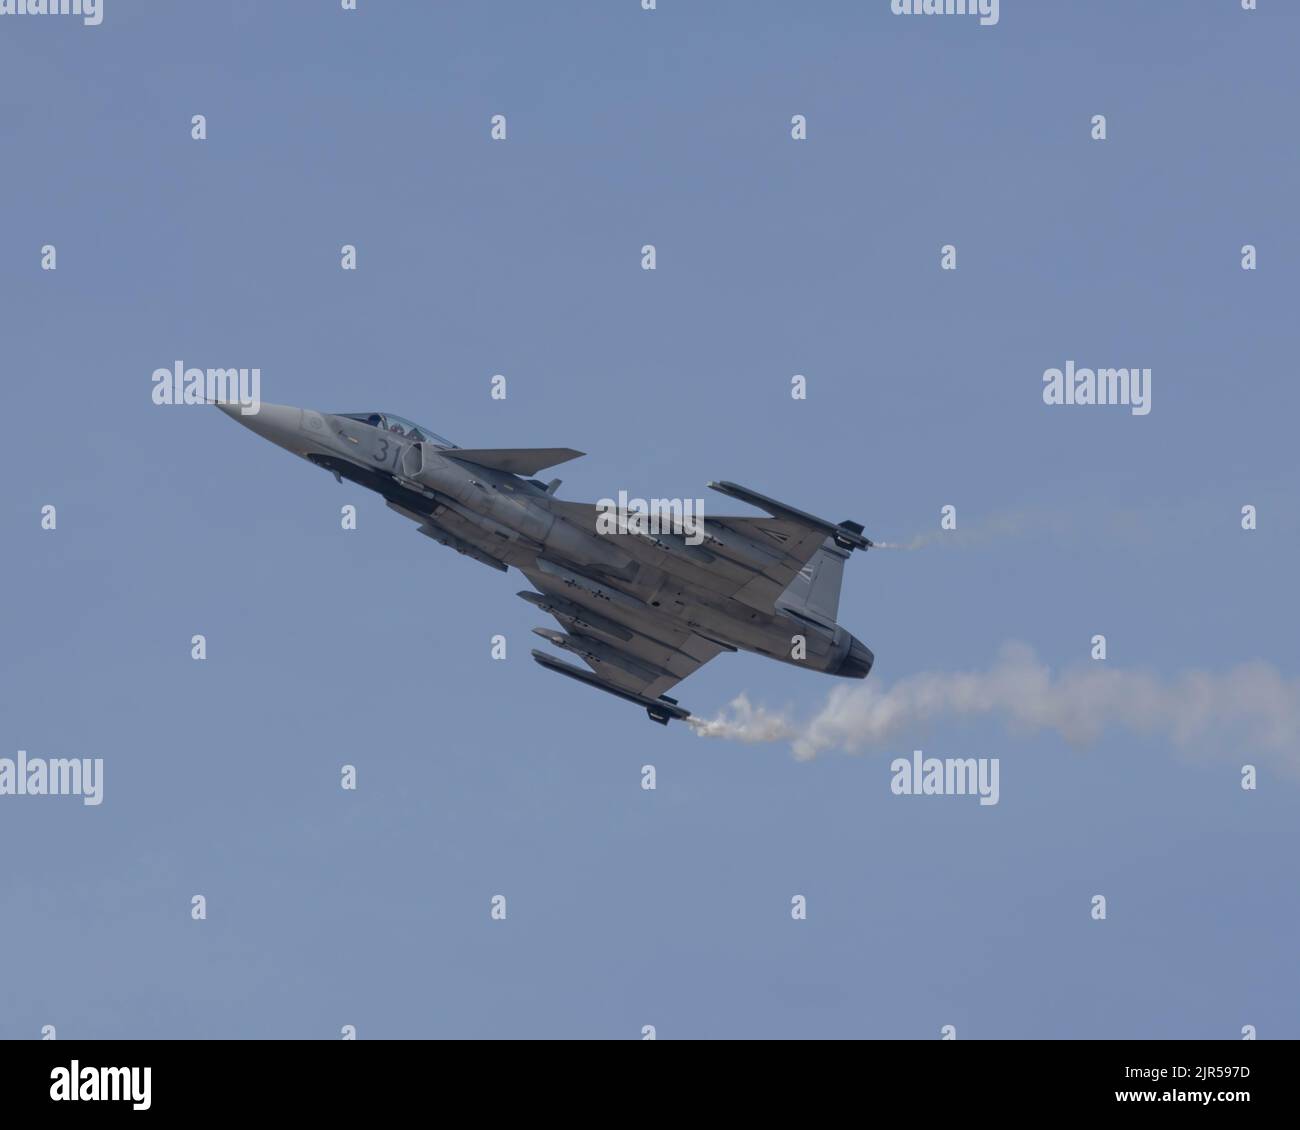 The Hungarian Saab Gripen flying at the 2022 Royal International Air Tattoo Stock Photo